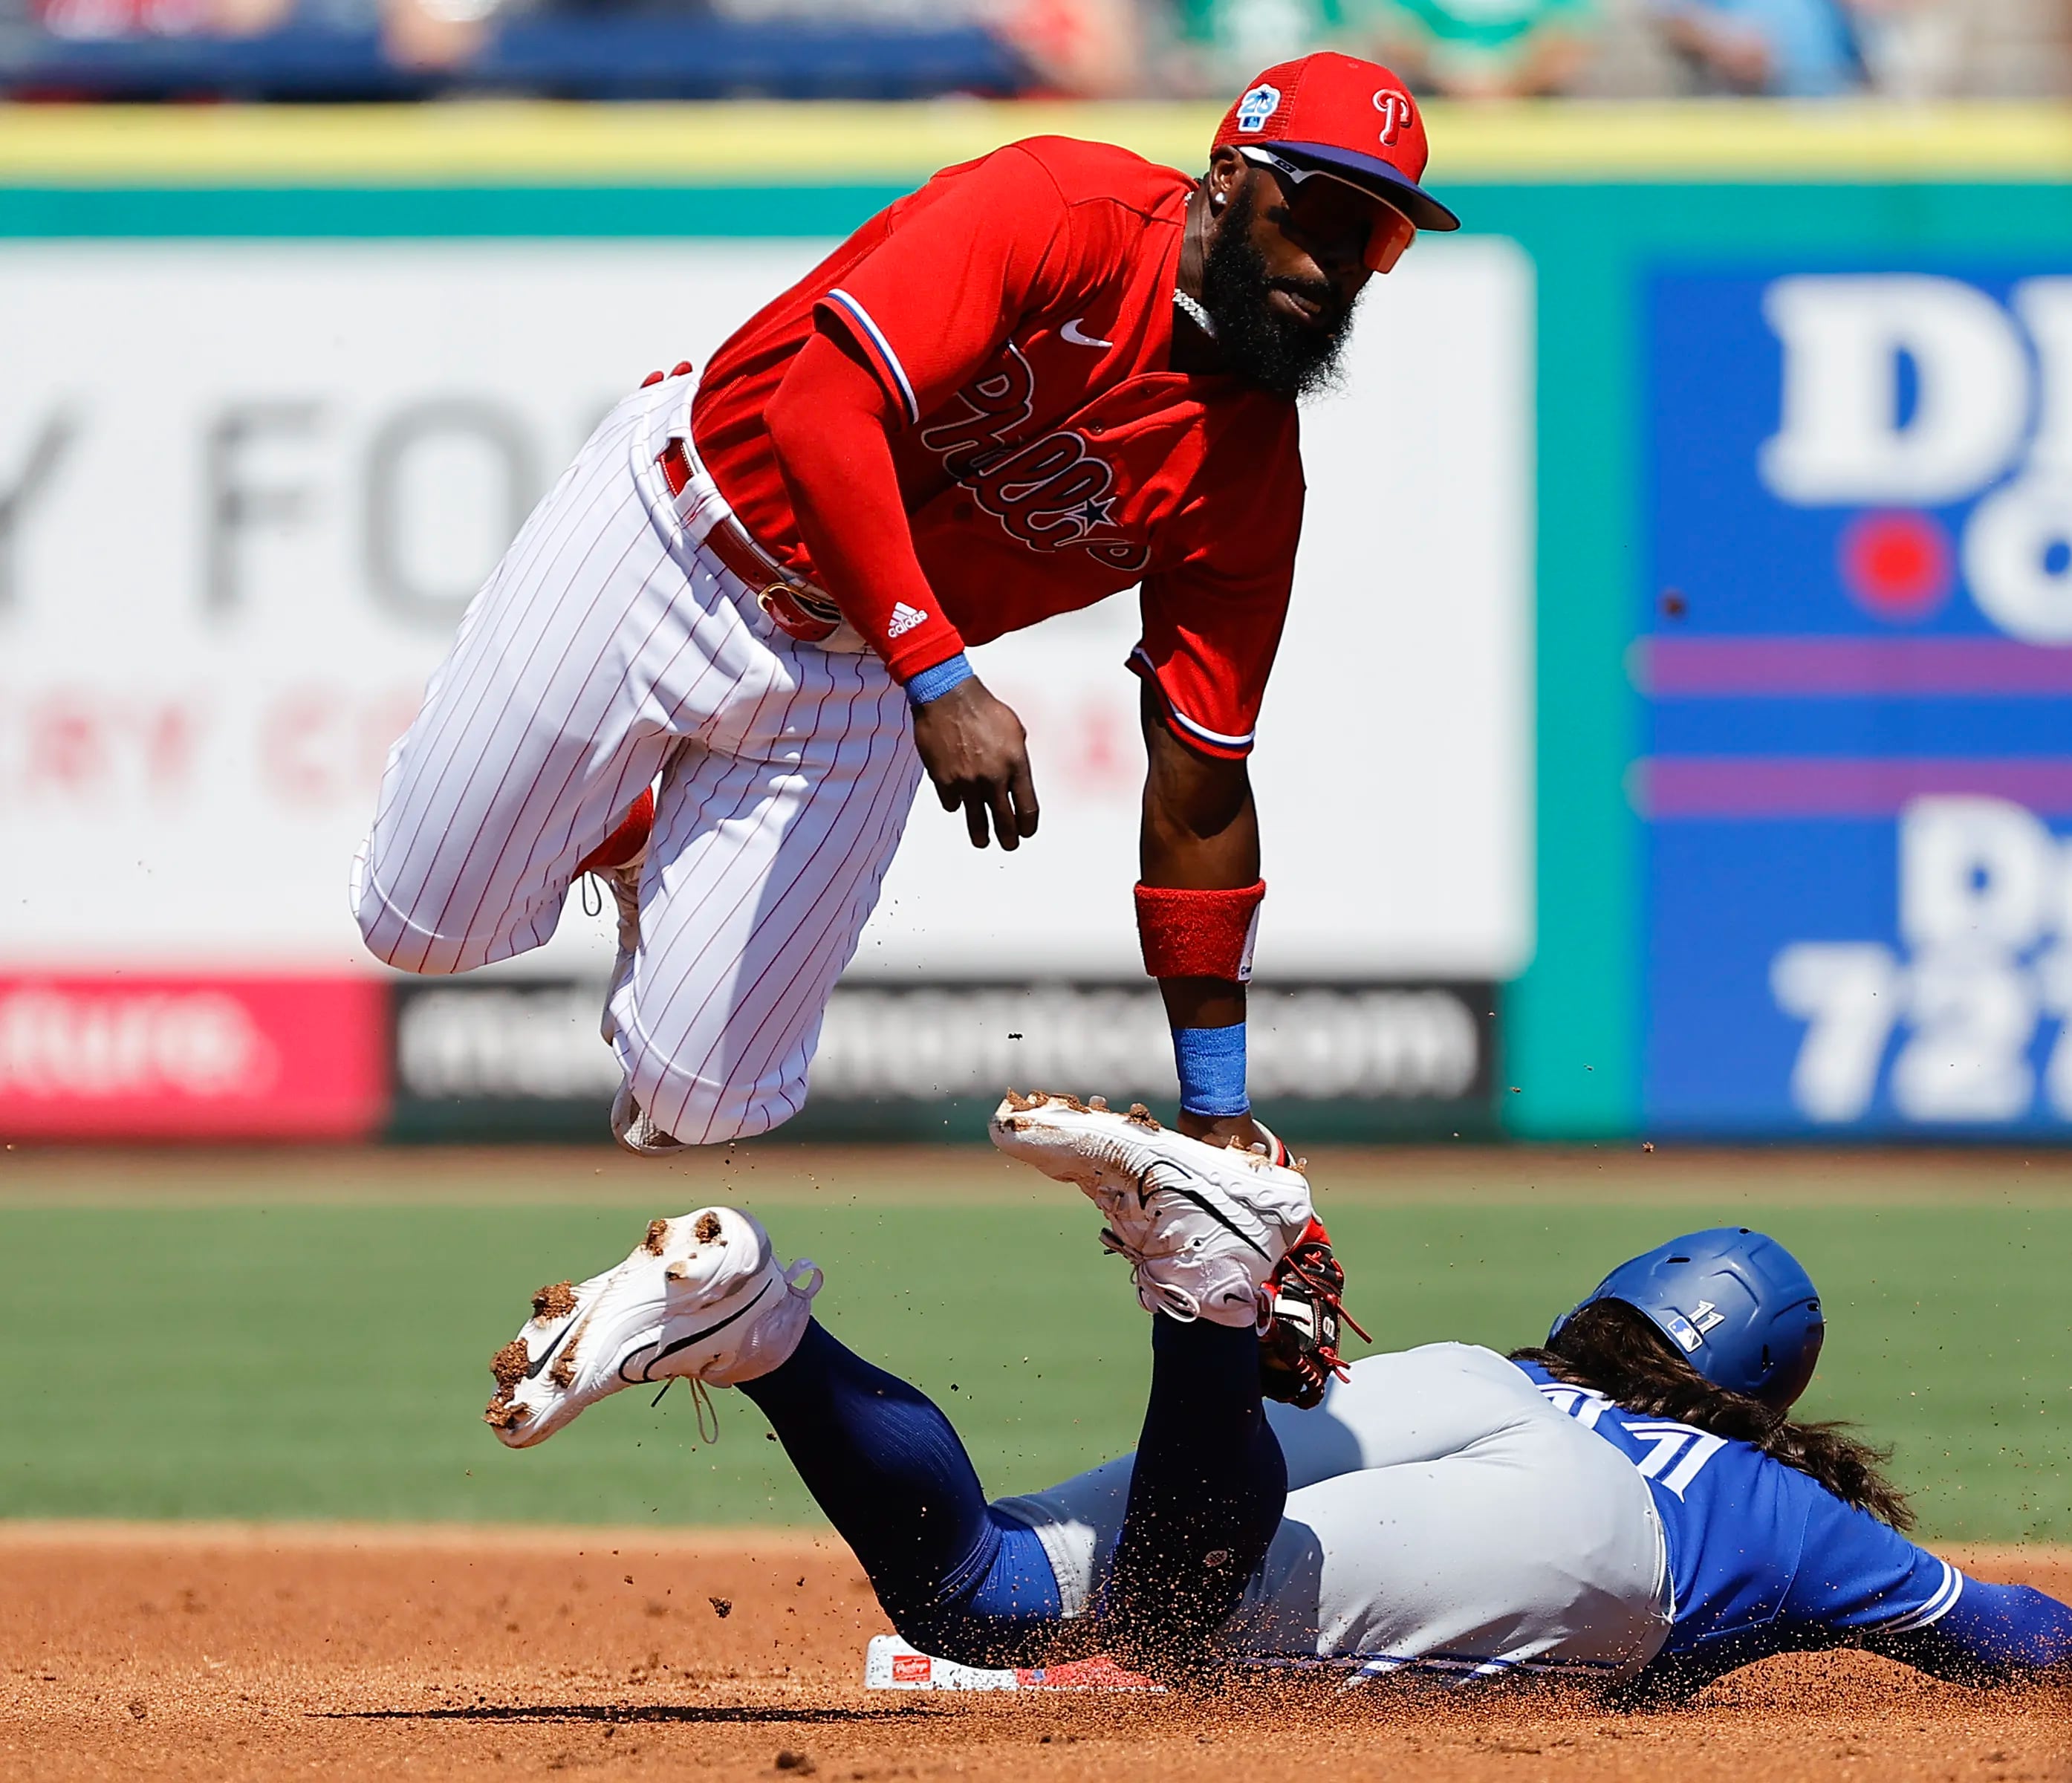 Photos from the Phillies loss to the Blue Jays